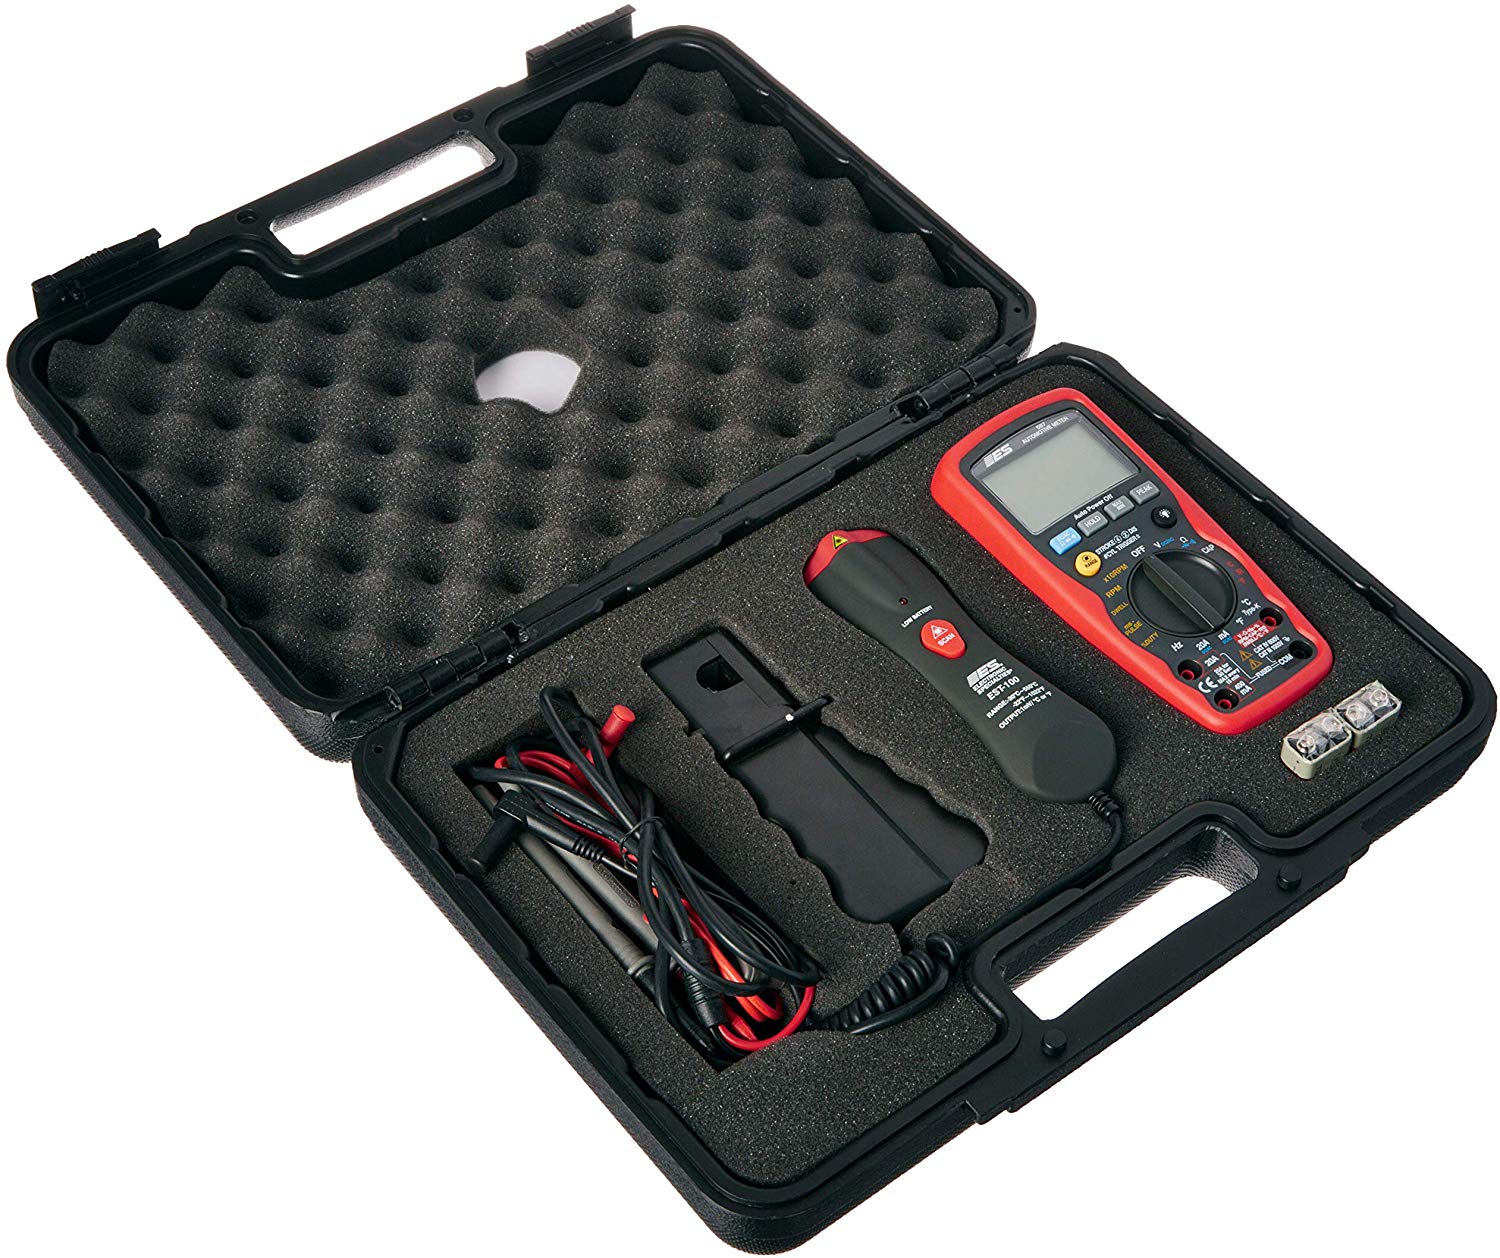 ESI 597IR 597 1000V CATIII DMM and EST-100 IR Thermometer Kit - MPR Tools & Equipment